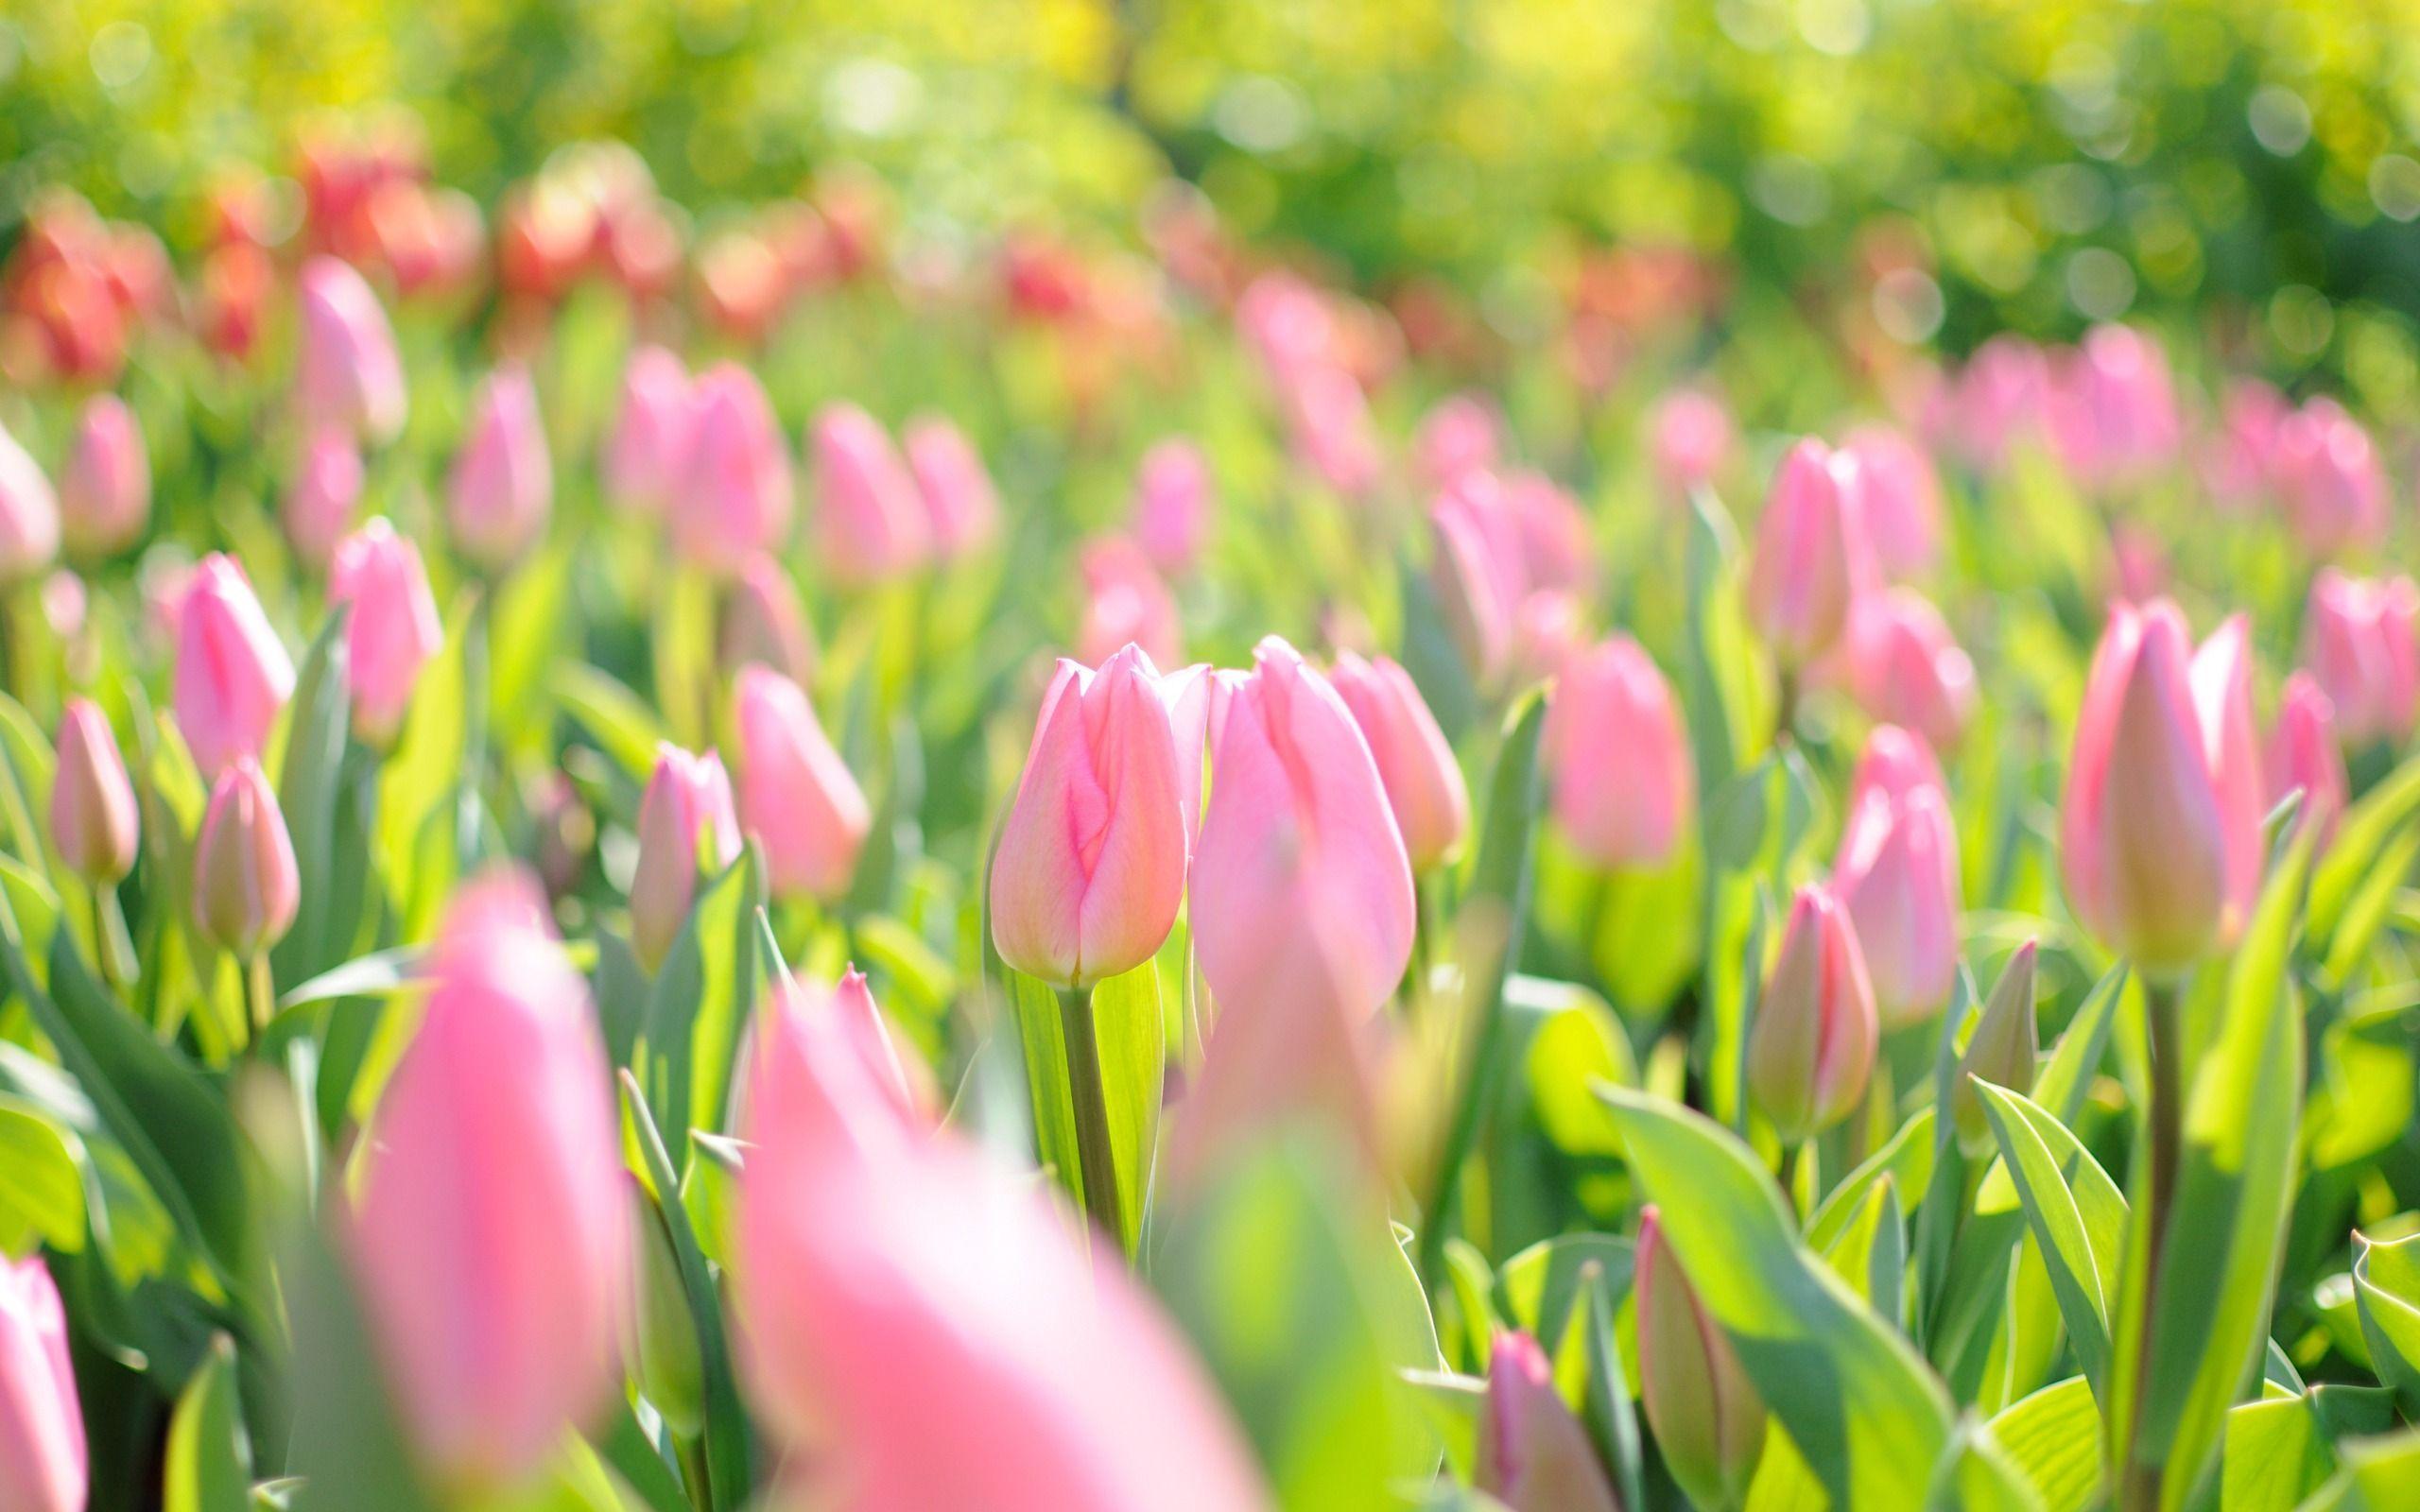 Wallpaper For > Purple And Pink Tulips Wallpaper